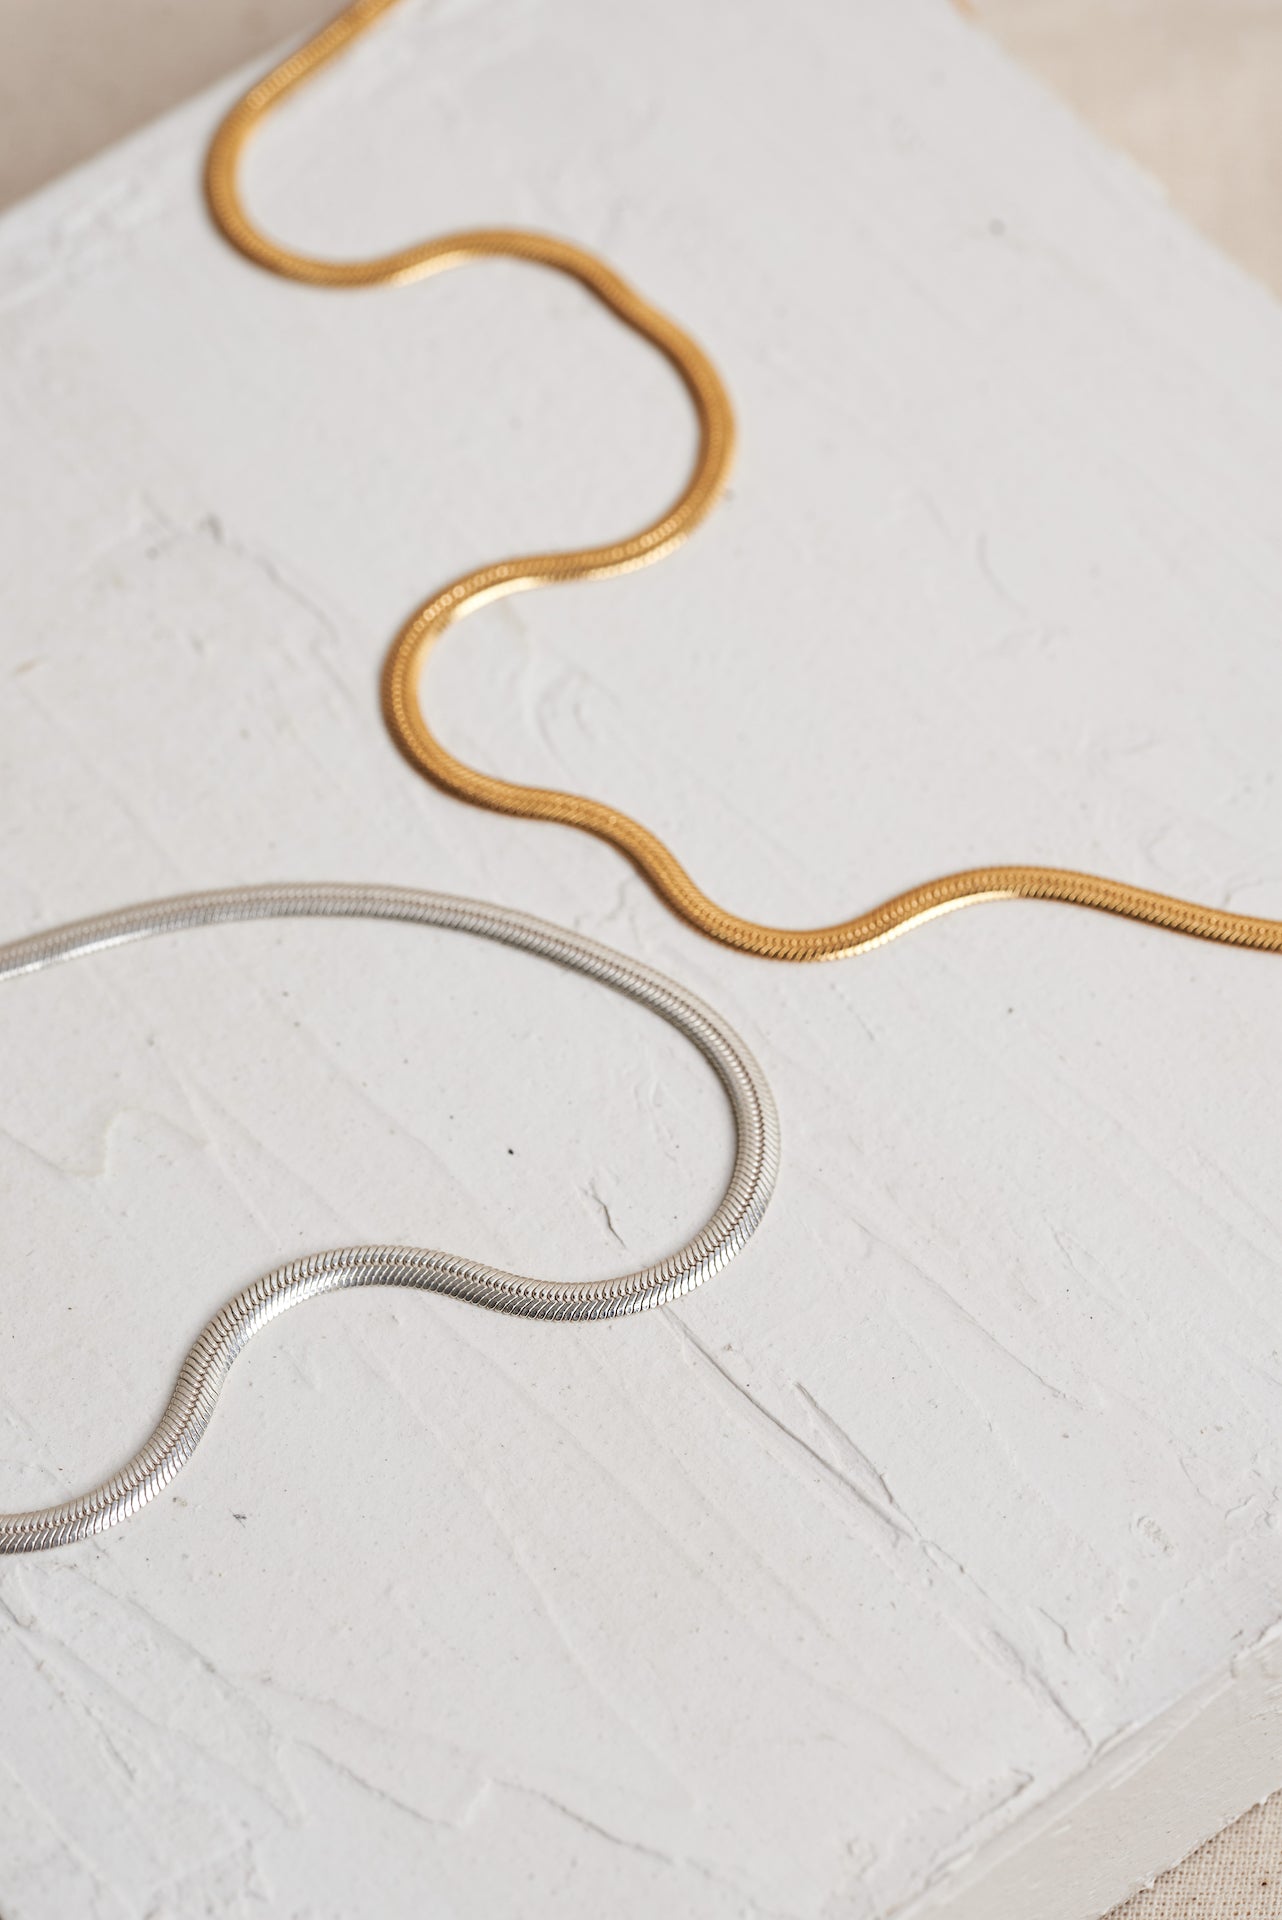 Designed by Megan Collins, the "Flow Necklace" is a classic must-have in every minimalists’ wardrobe. Created to represent the perfect equilibrium between stability and change.